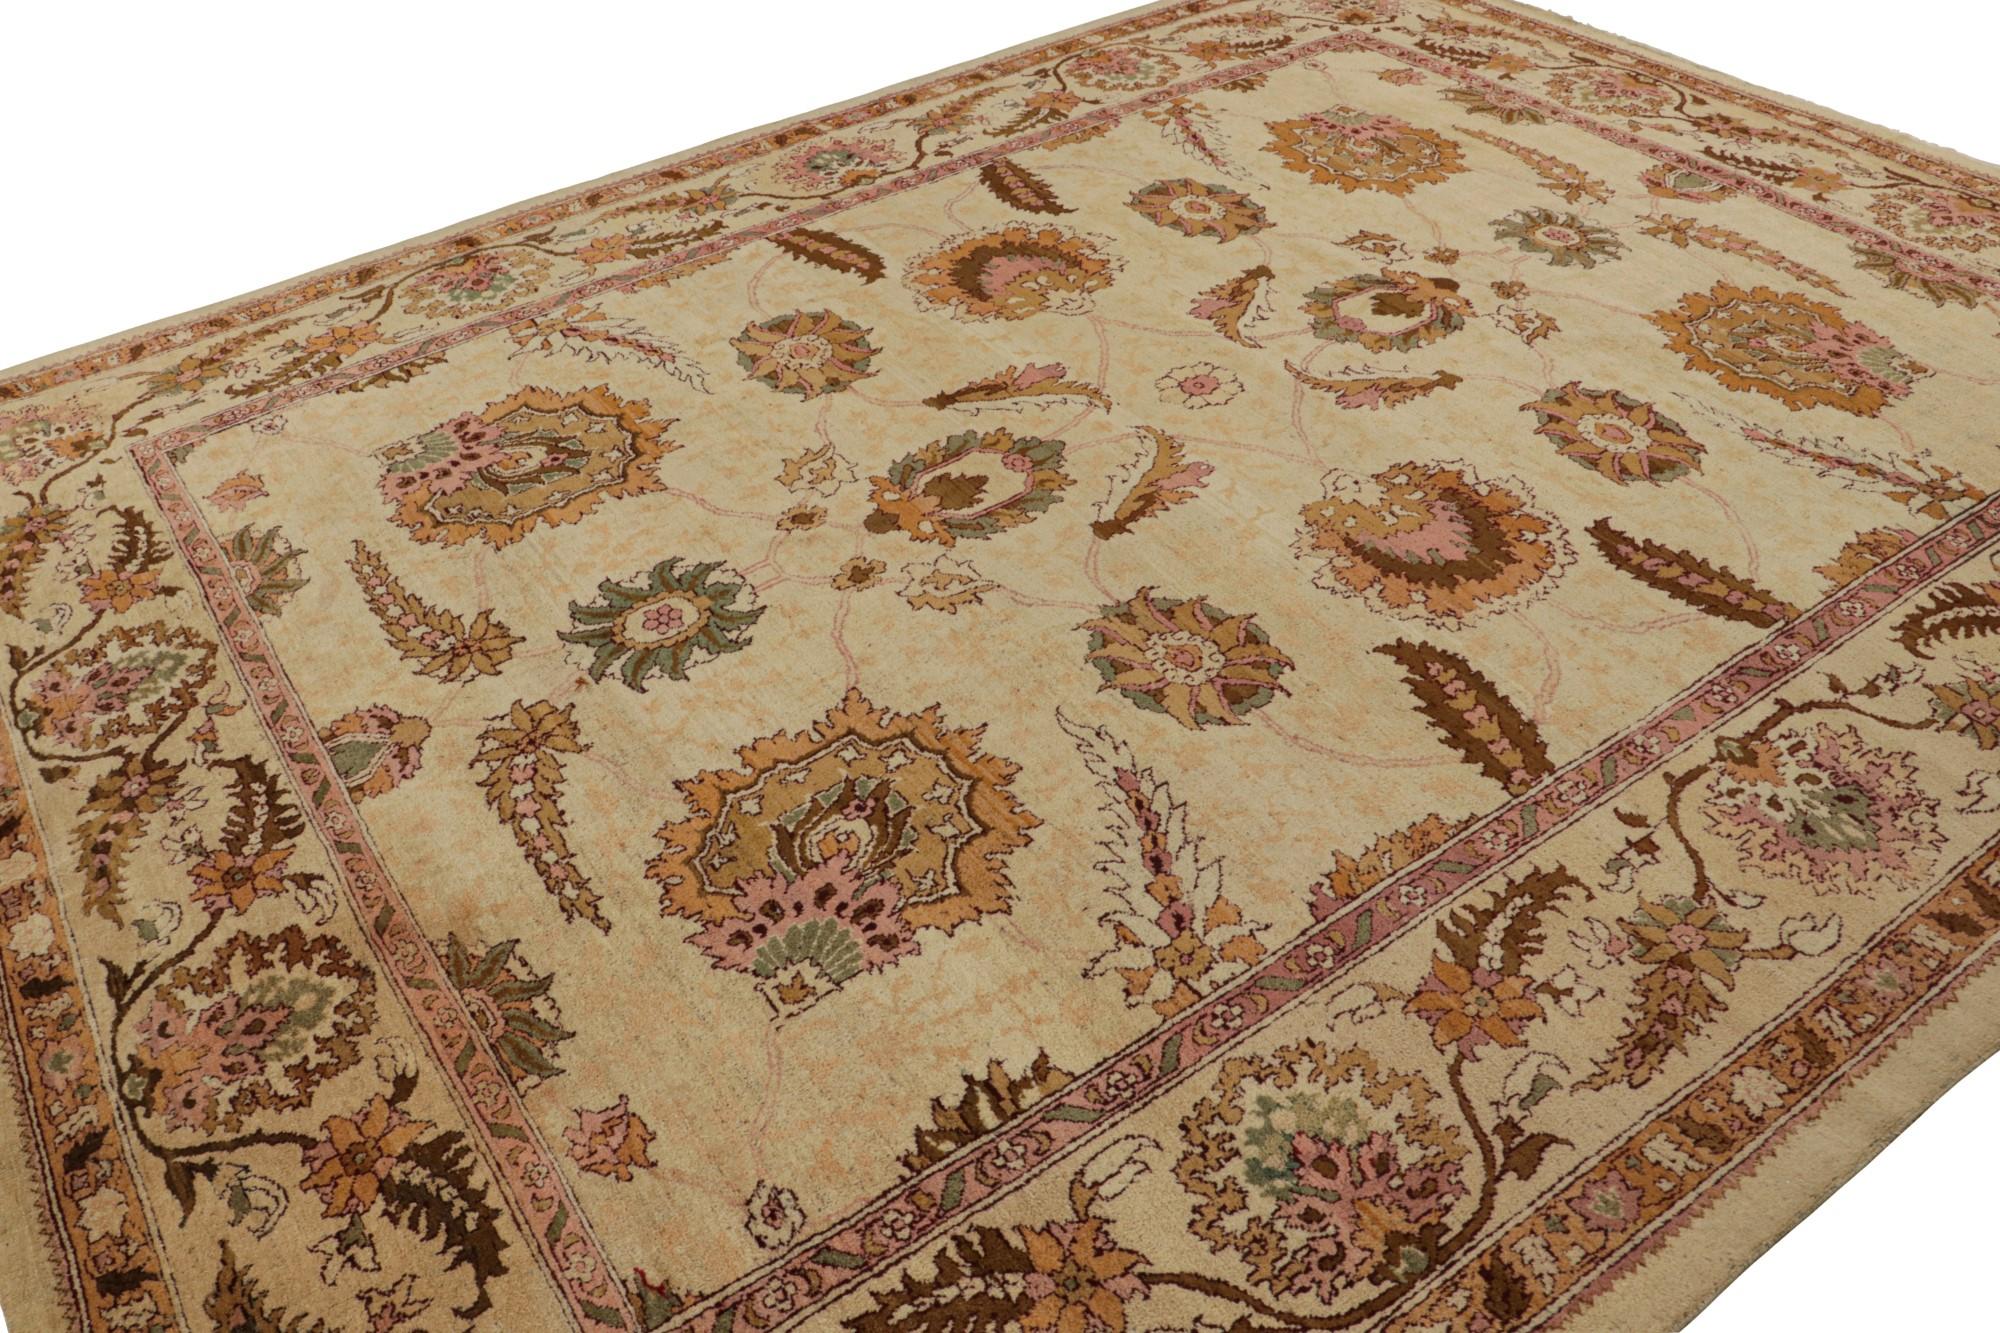 Hand knotted in wool originating from India circa 1890-1900, this 10x12 antique rug represents a rare large-size Agra rug of further exceptional color and refined pattern—revered among the most sought-after classic rug families seldom enjoying such